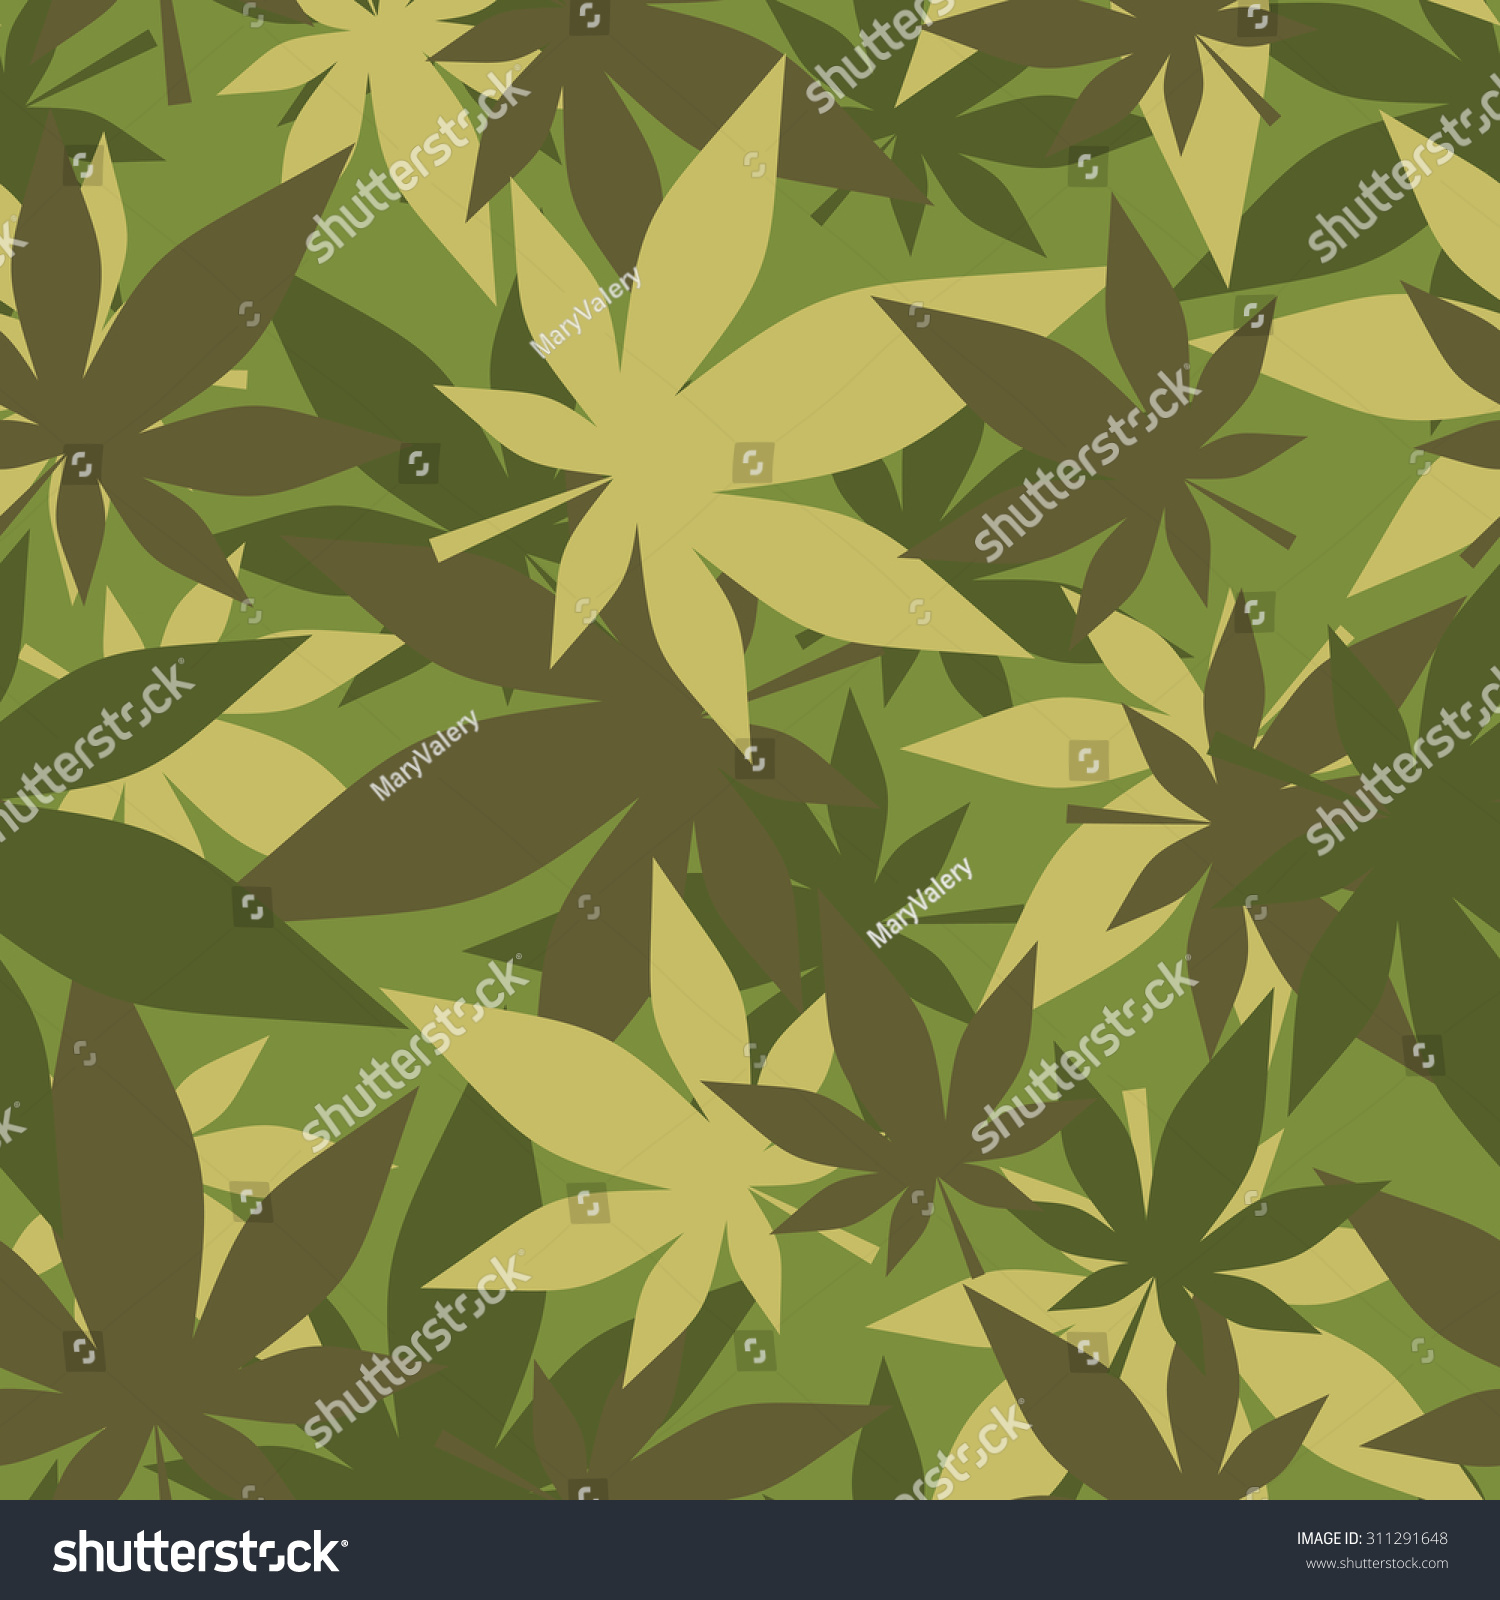 stock-vector-military-texture-of-marijuana-soldiers-camouflage-hemp-army-seamless-background-from-leaves-of-311291648.jpg